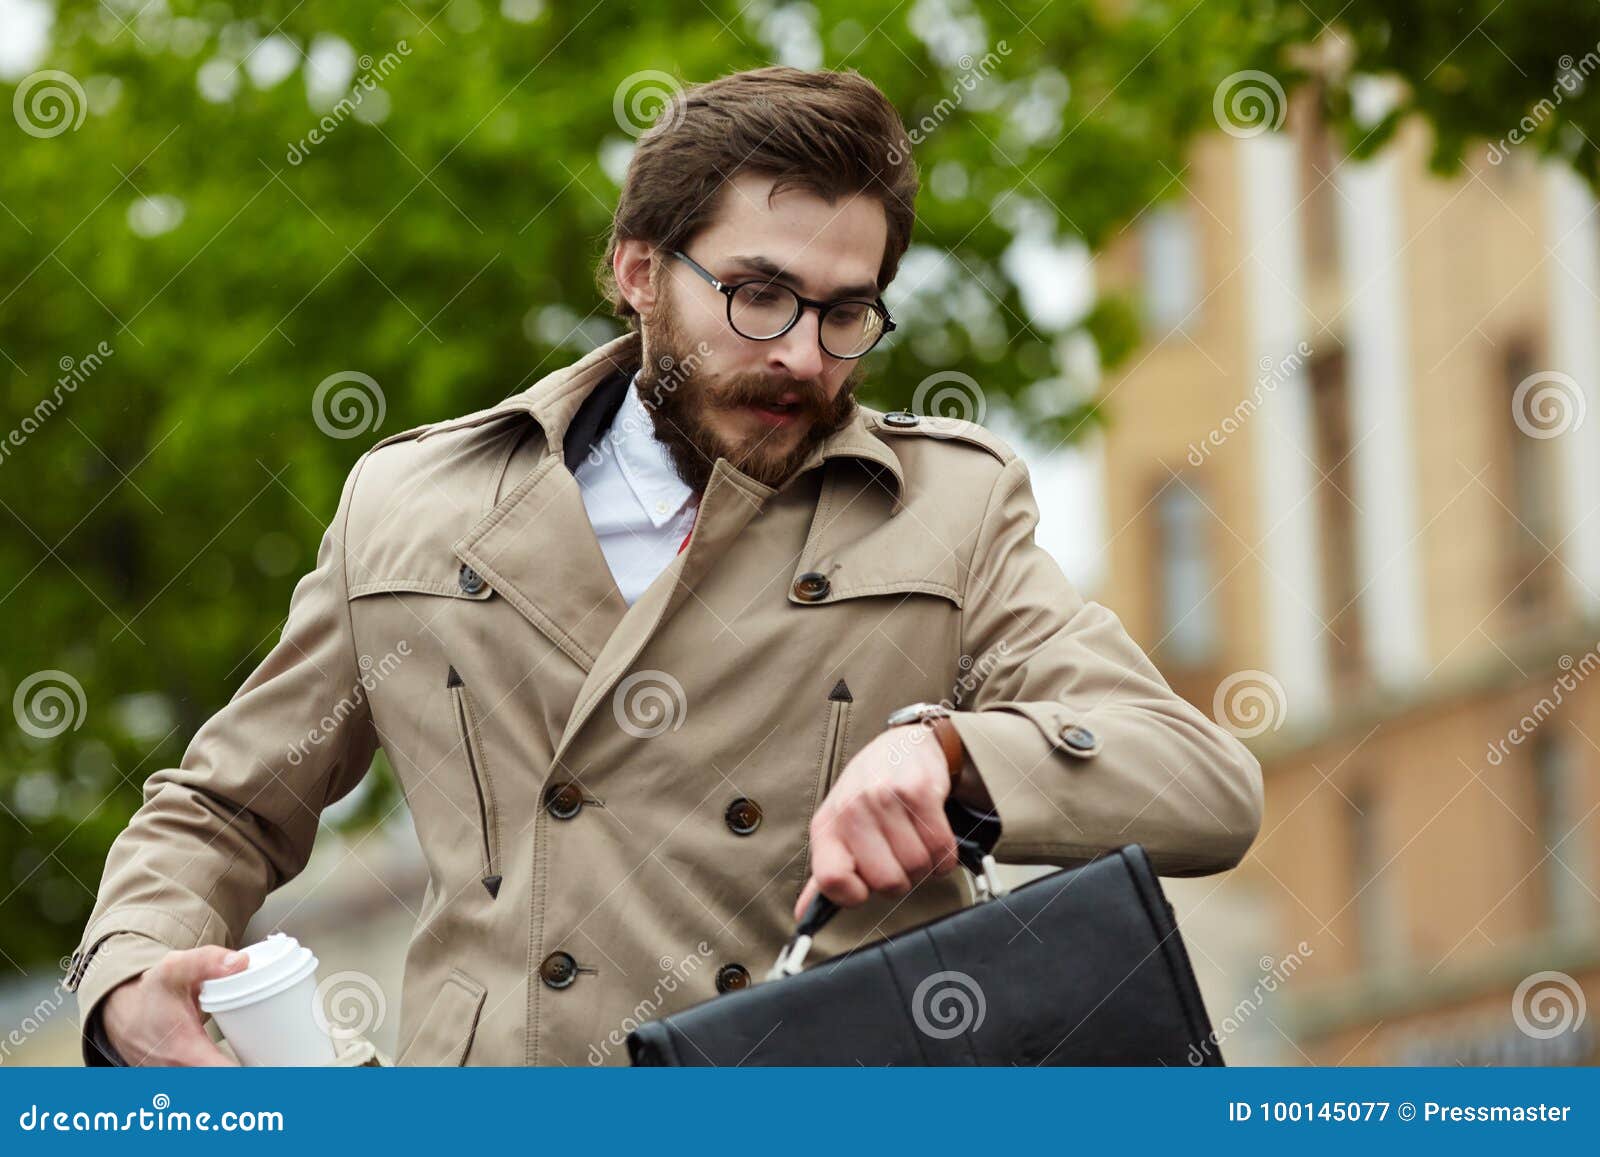 Being late for interview stock image. Image of employee - 100145077